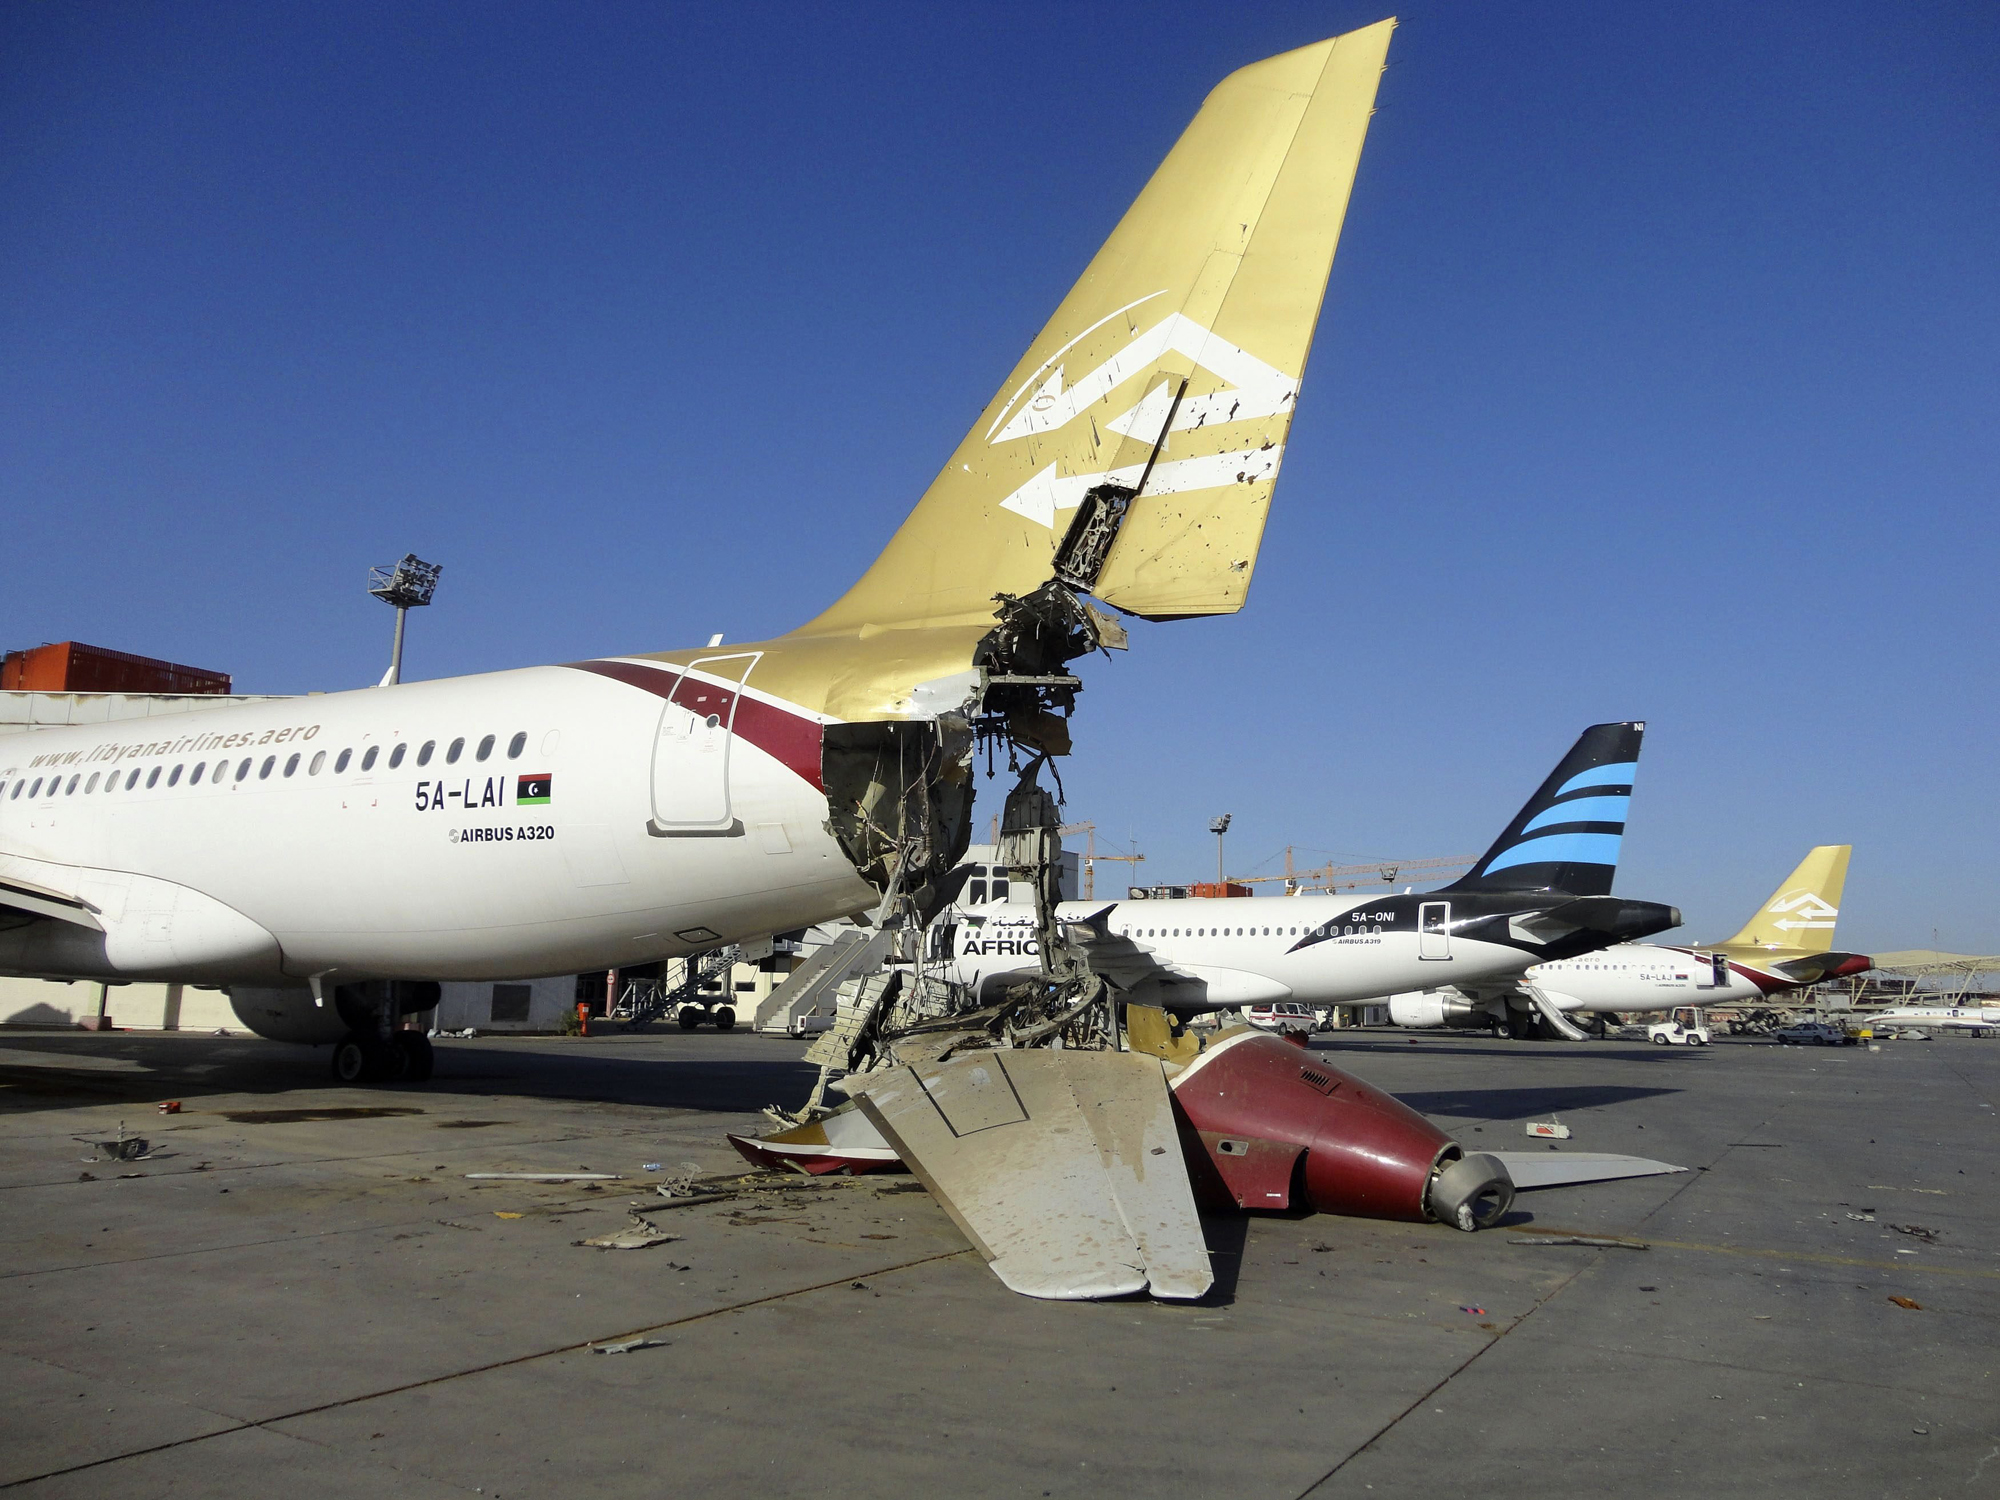 A damaged aircraft is pictured after shelling at Tripoli International Airport, Aug. 24, 2014.